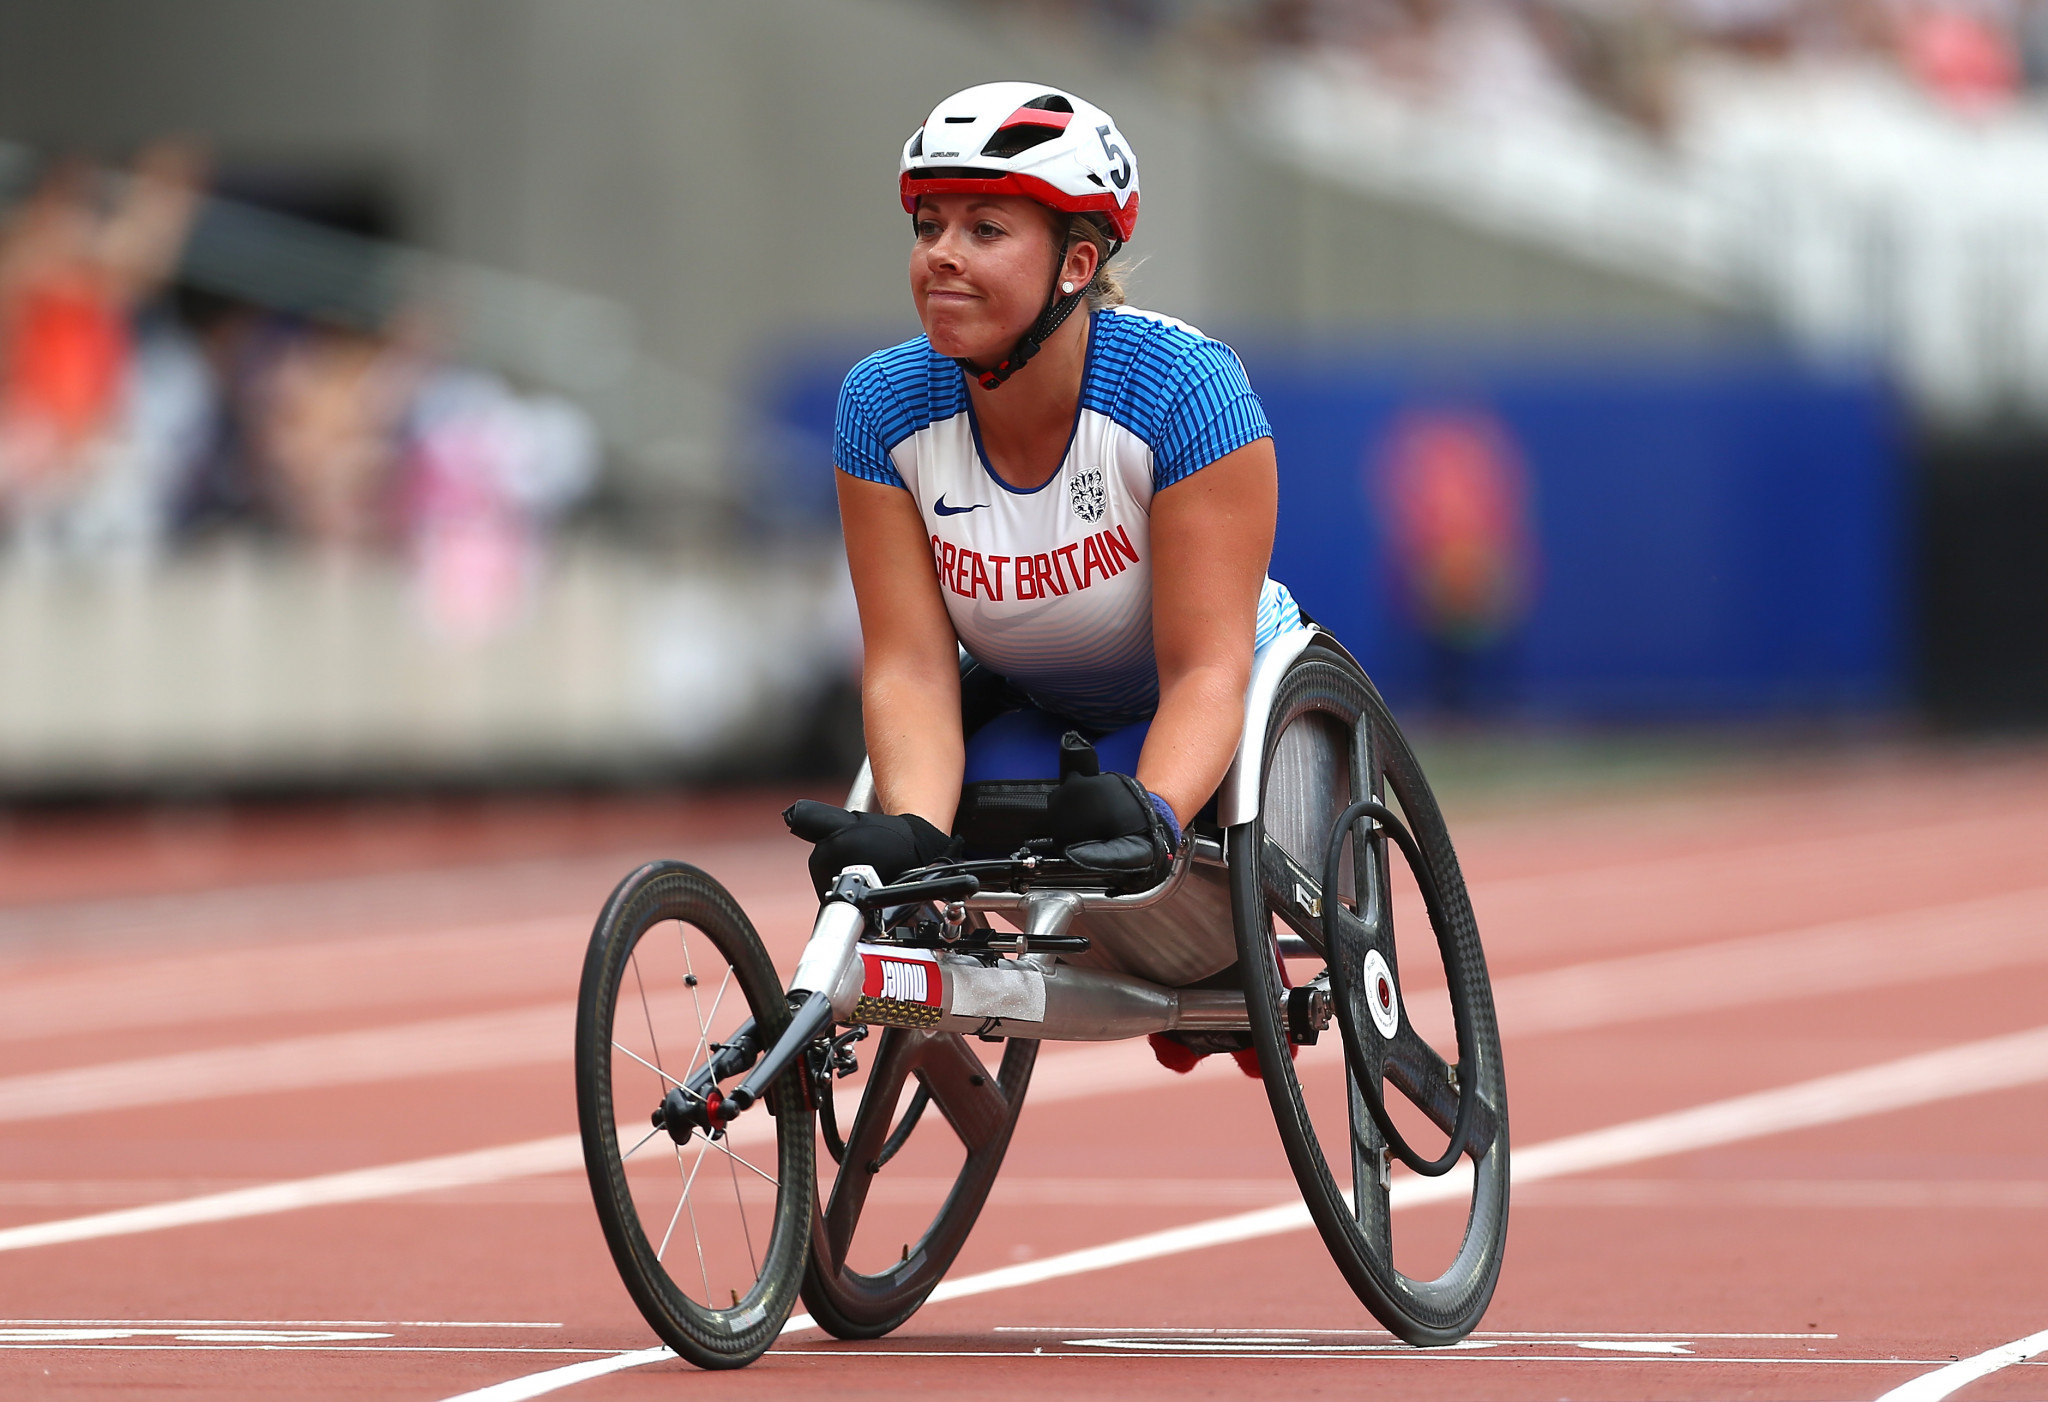 The 26-year-old is unbeaten in 2019 and has won five Paralympic medals, but does not have a kit sponsor ©Getty Images